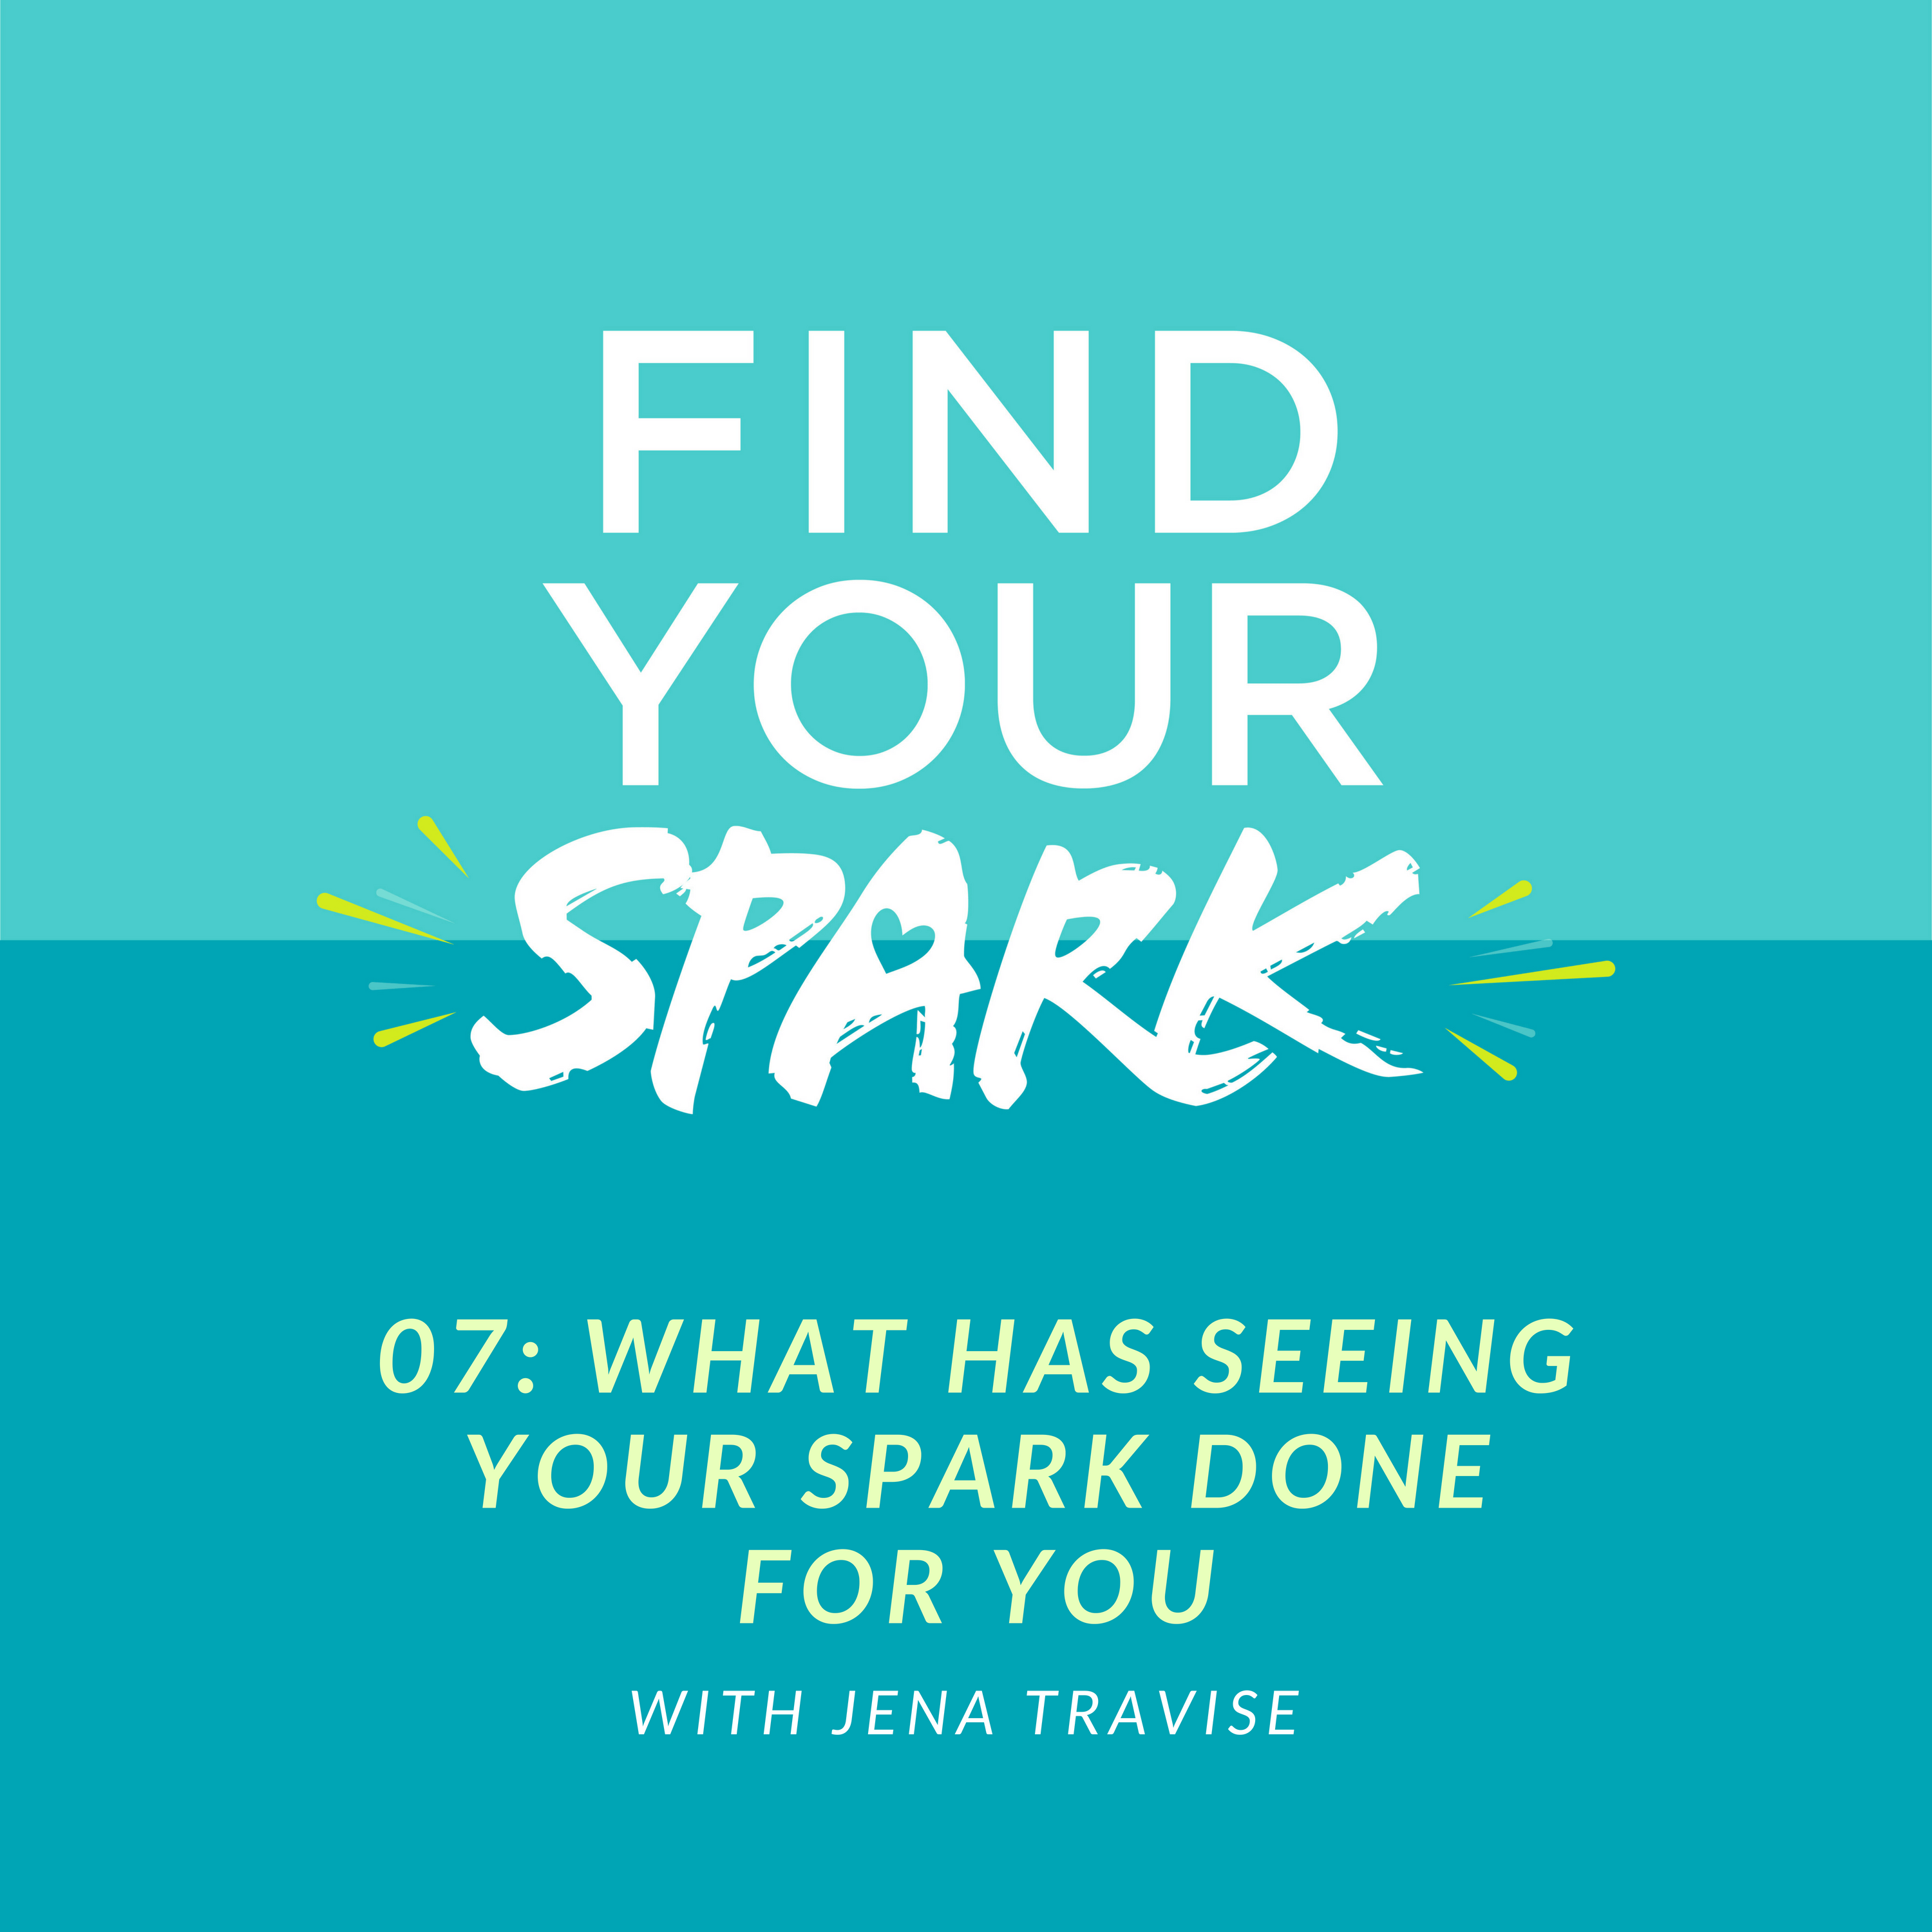 07: What Has Seeing your SPARK Done for you